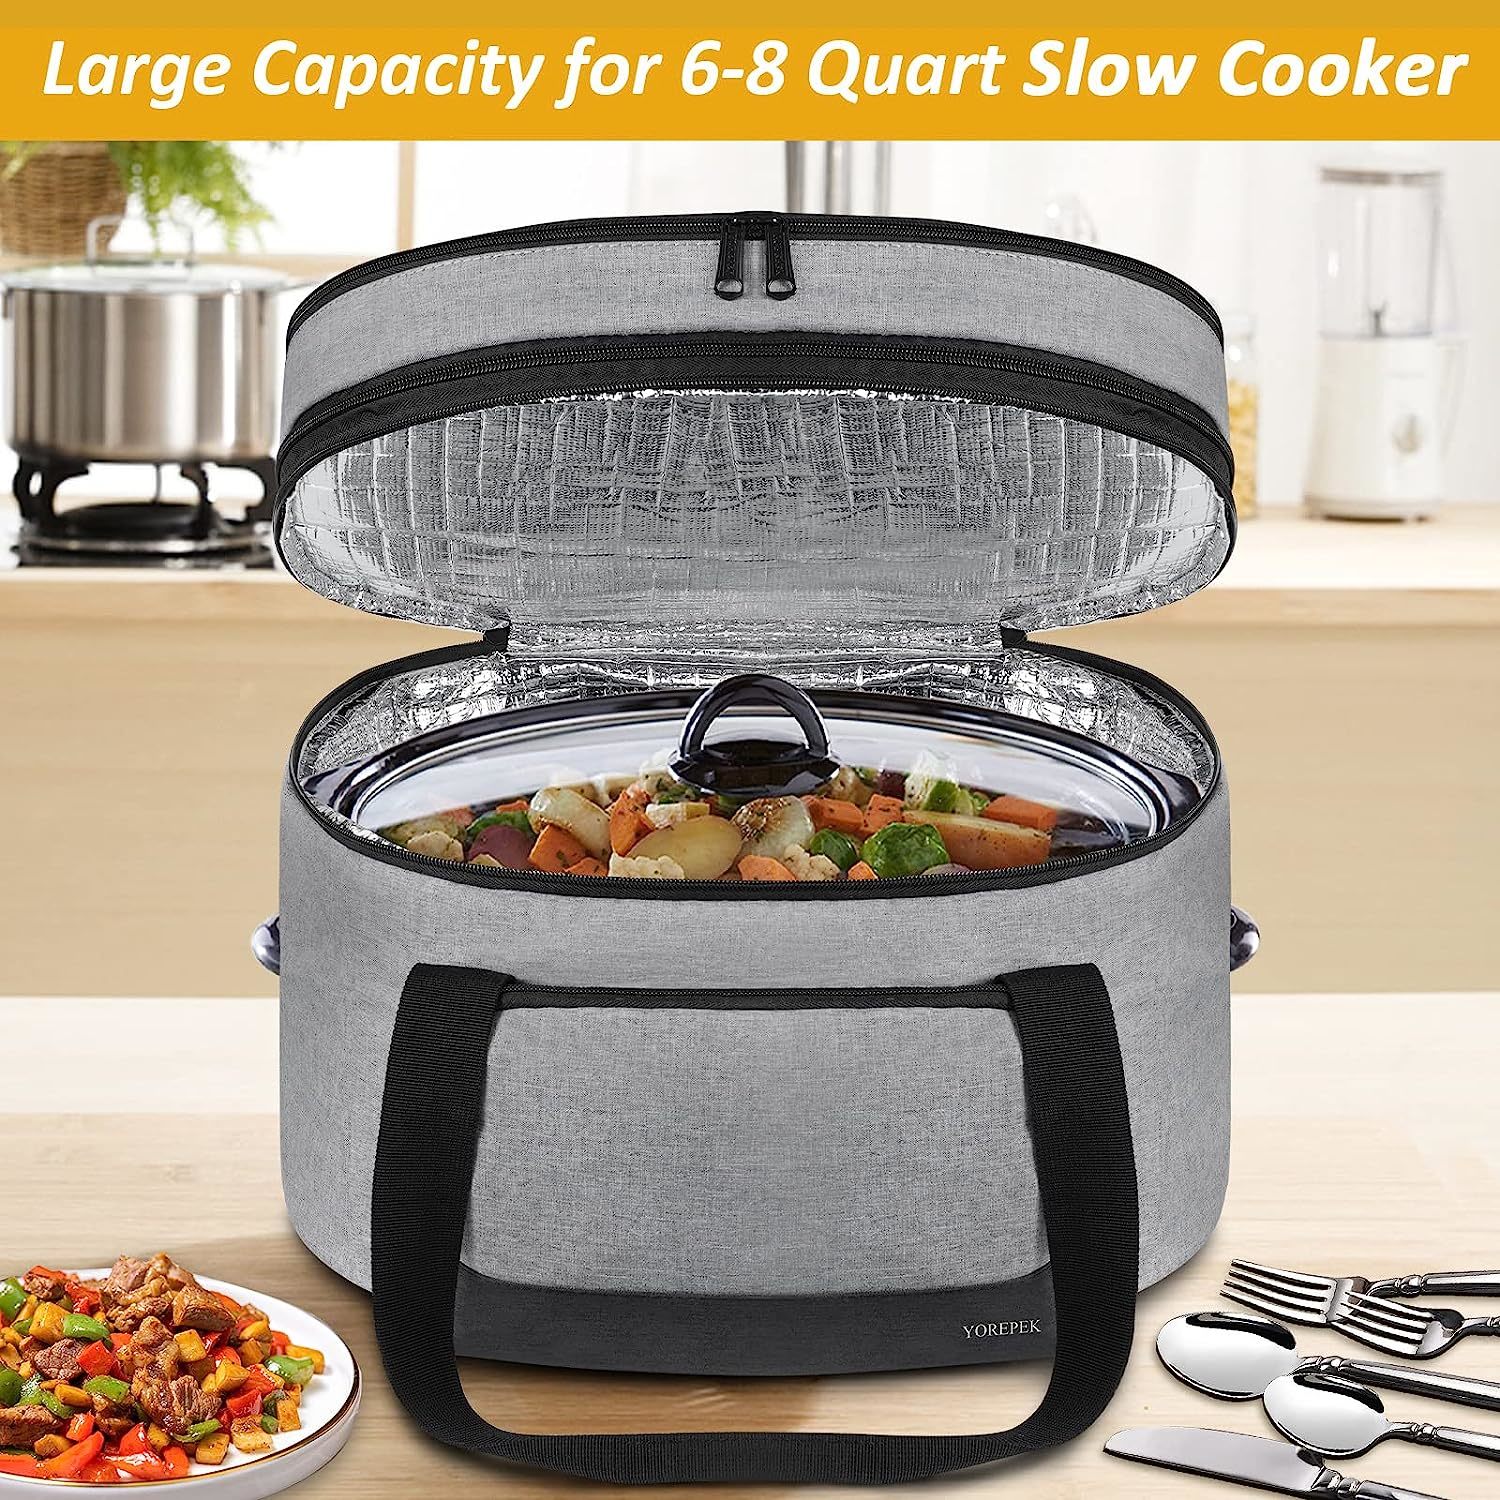 Silicone Slow Cooker Liners Fit Crock-Pot 7-8 Quart Oval Slow